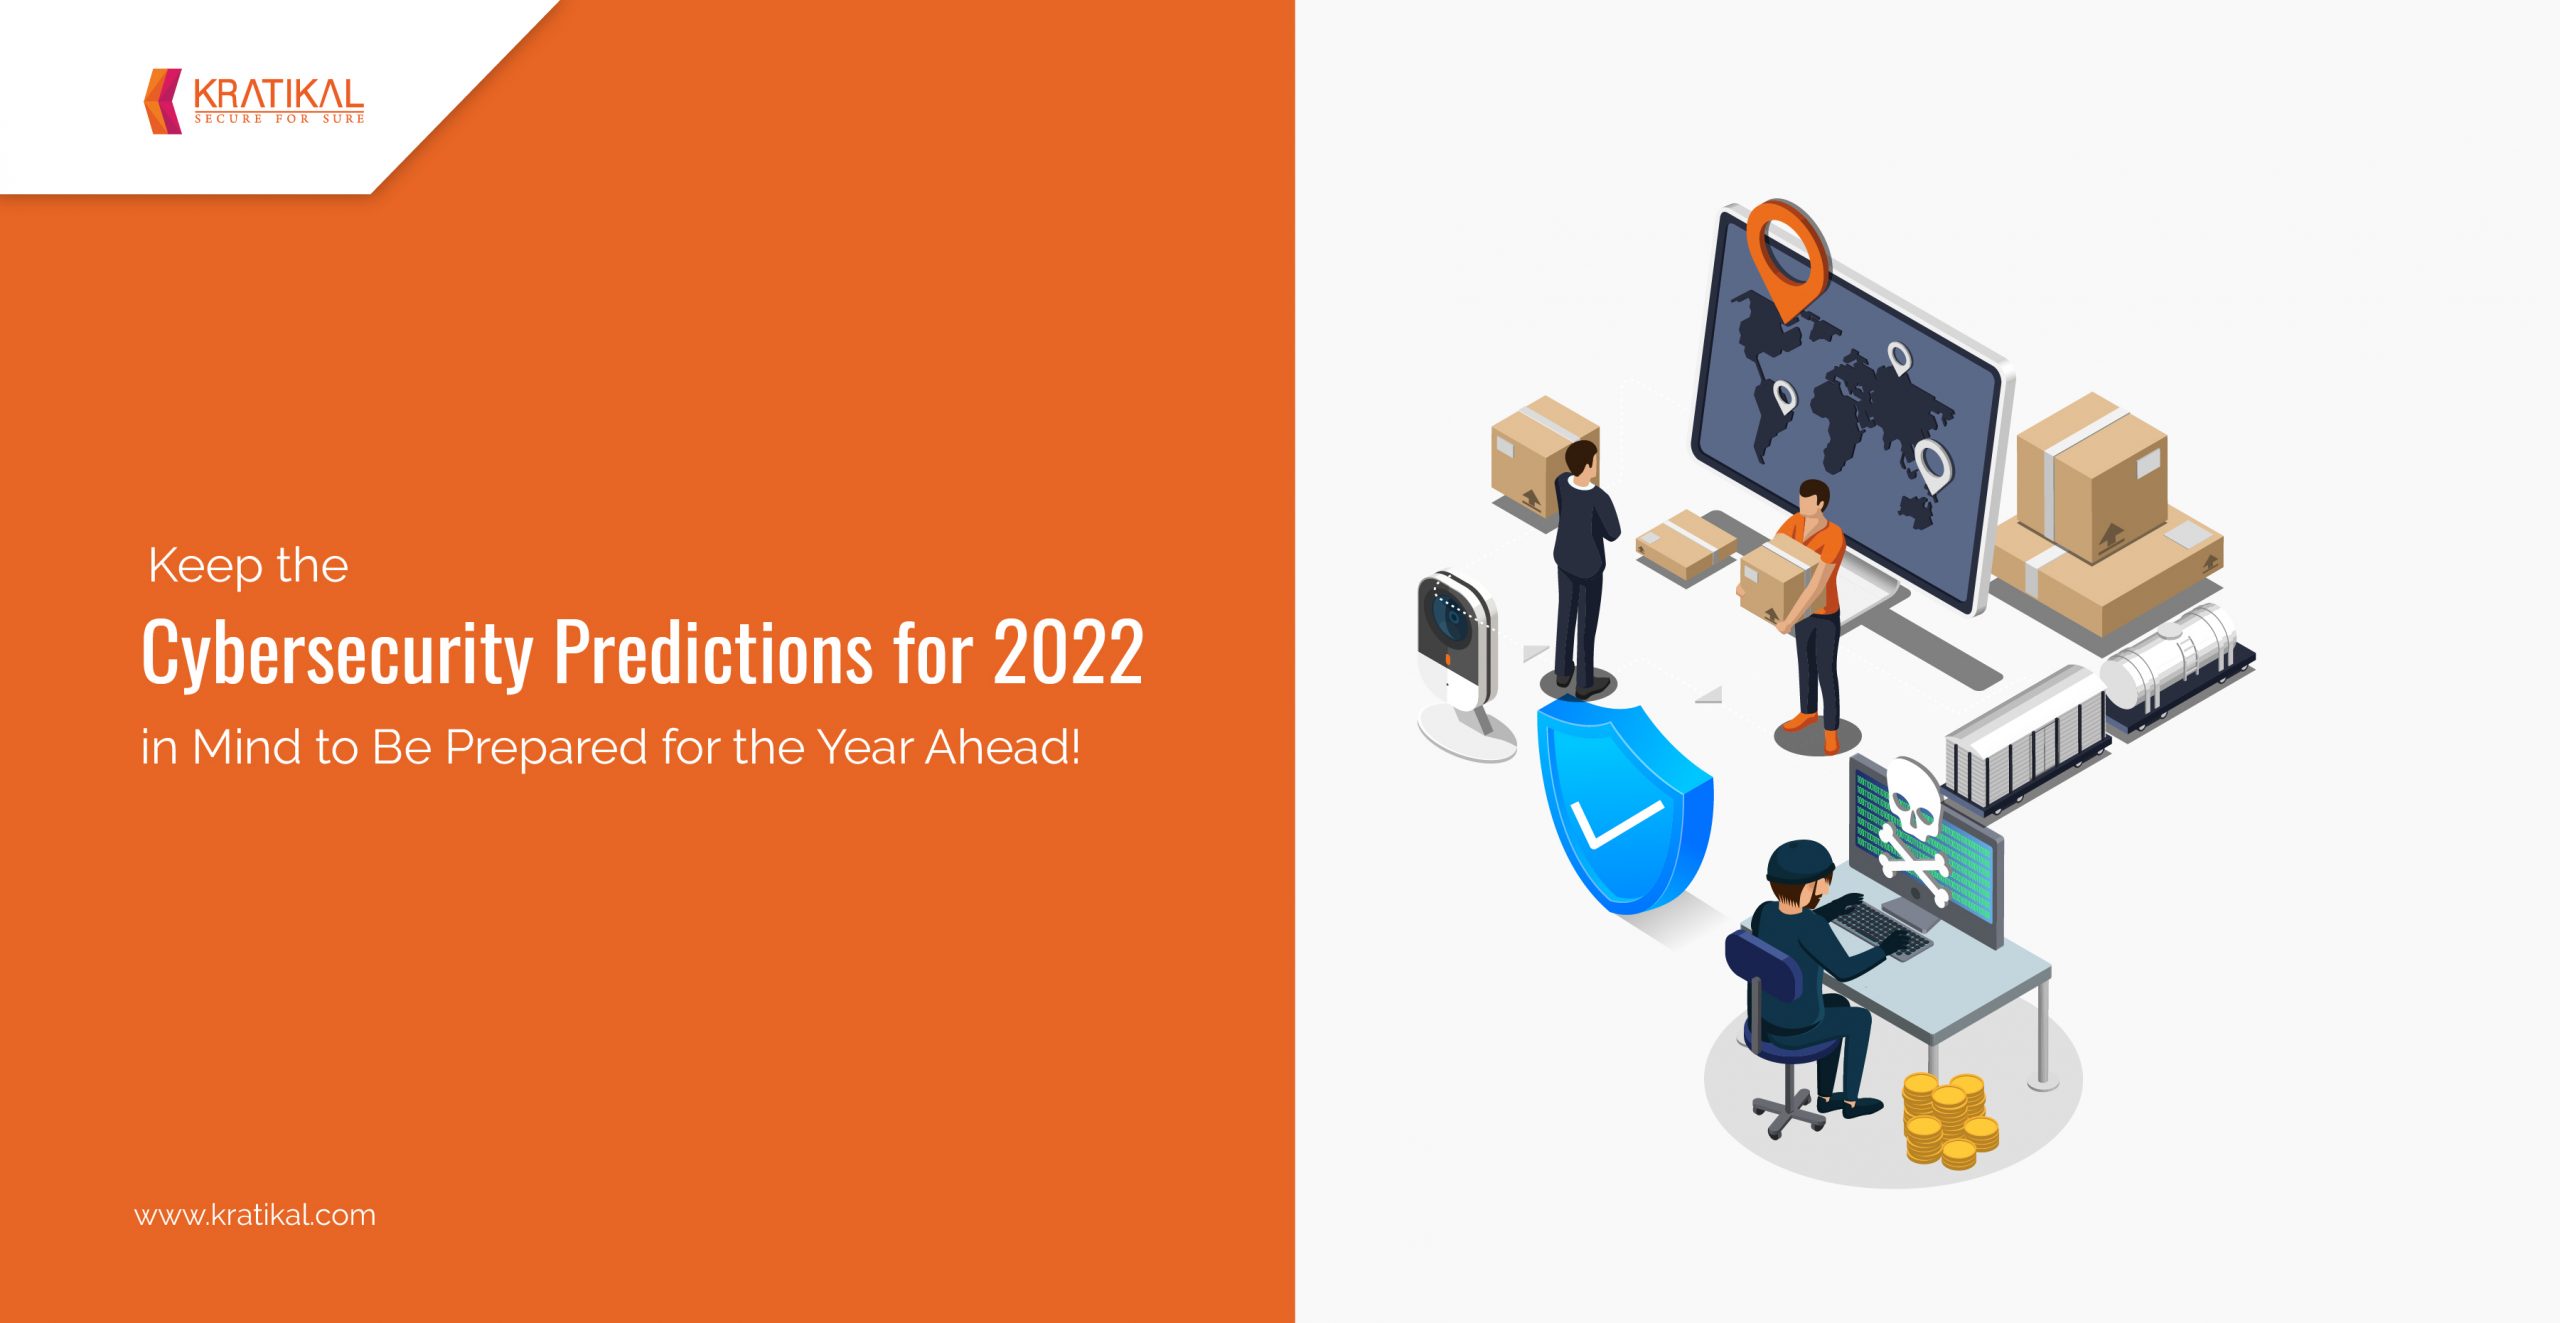 Cyber security predictions for 2022